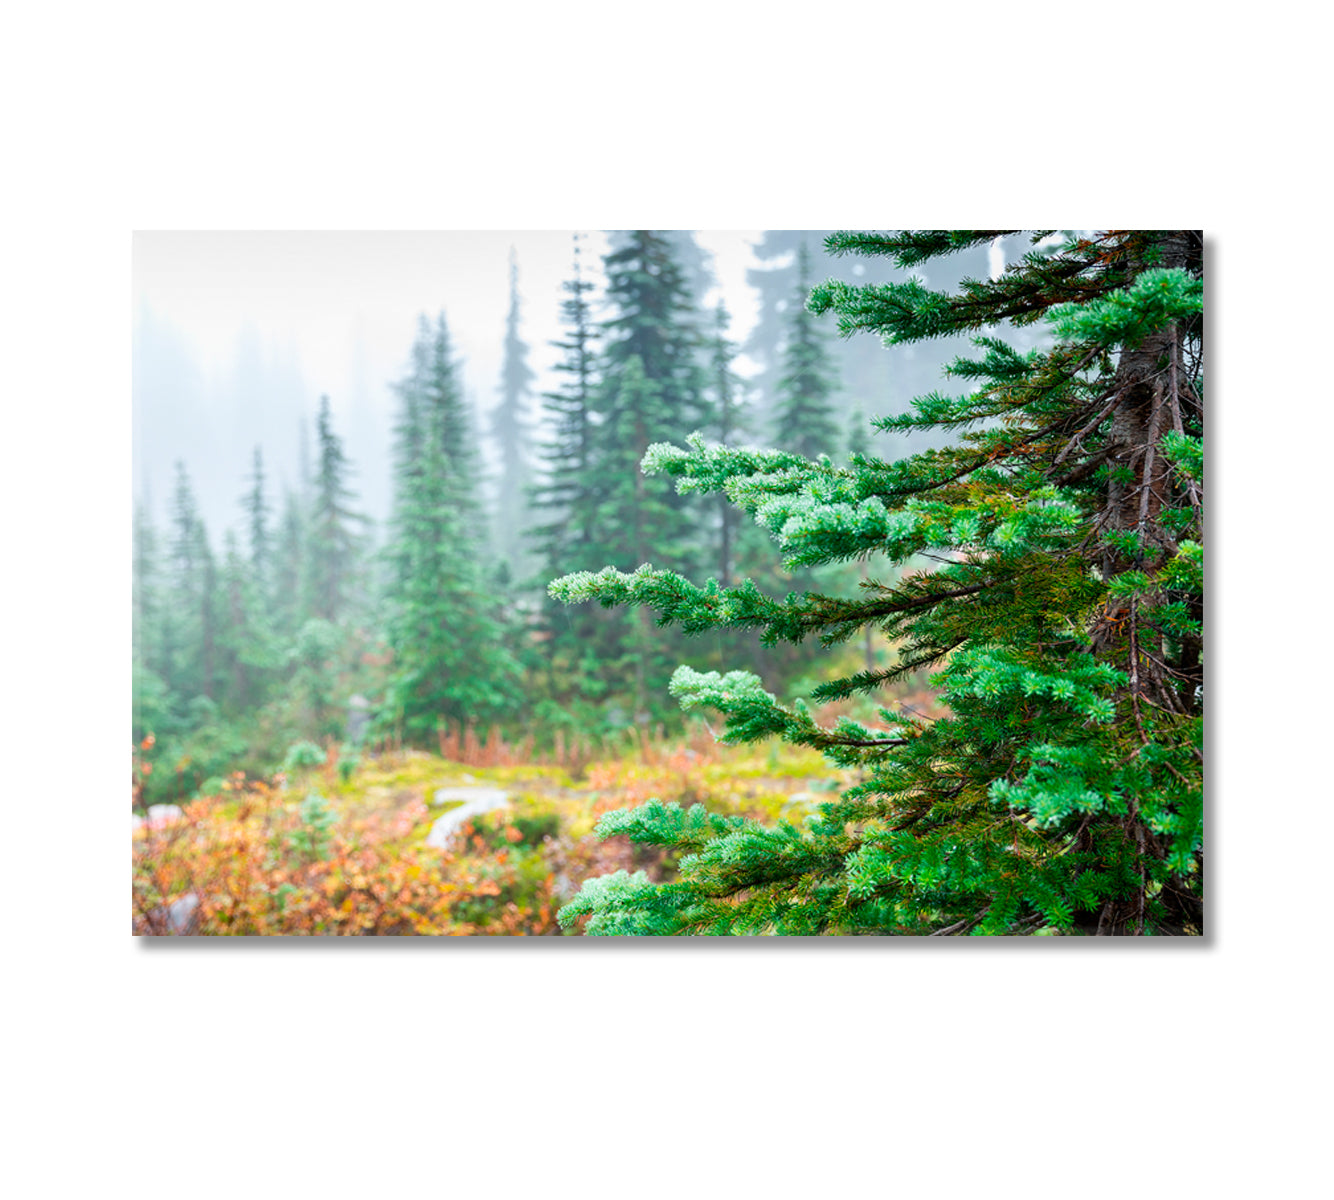 Green Pine Forest in Winter Canvas Print-Canvas Print-CetArt-1 Panel-24x16 inches-CetArt